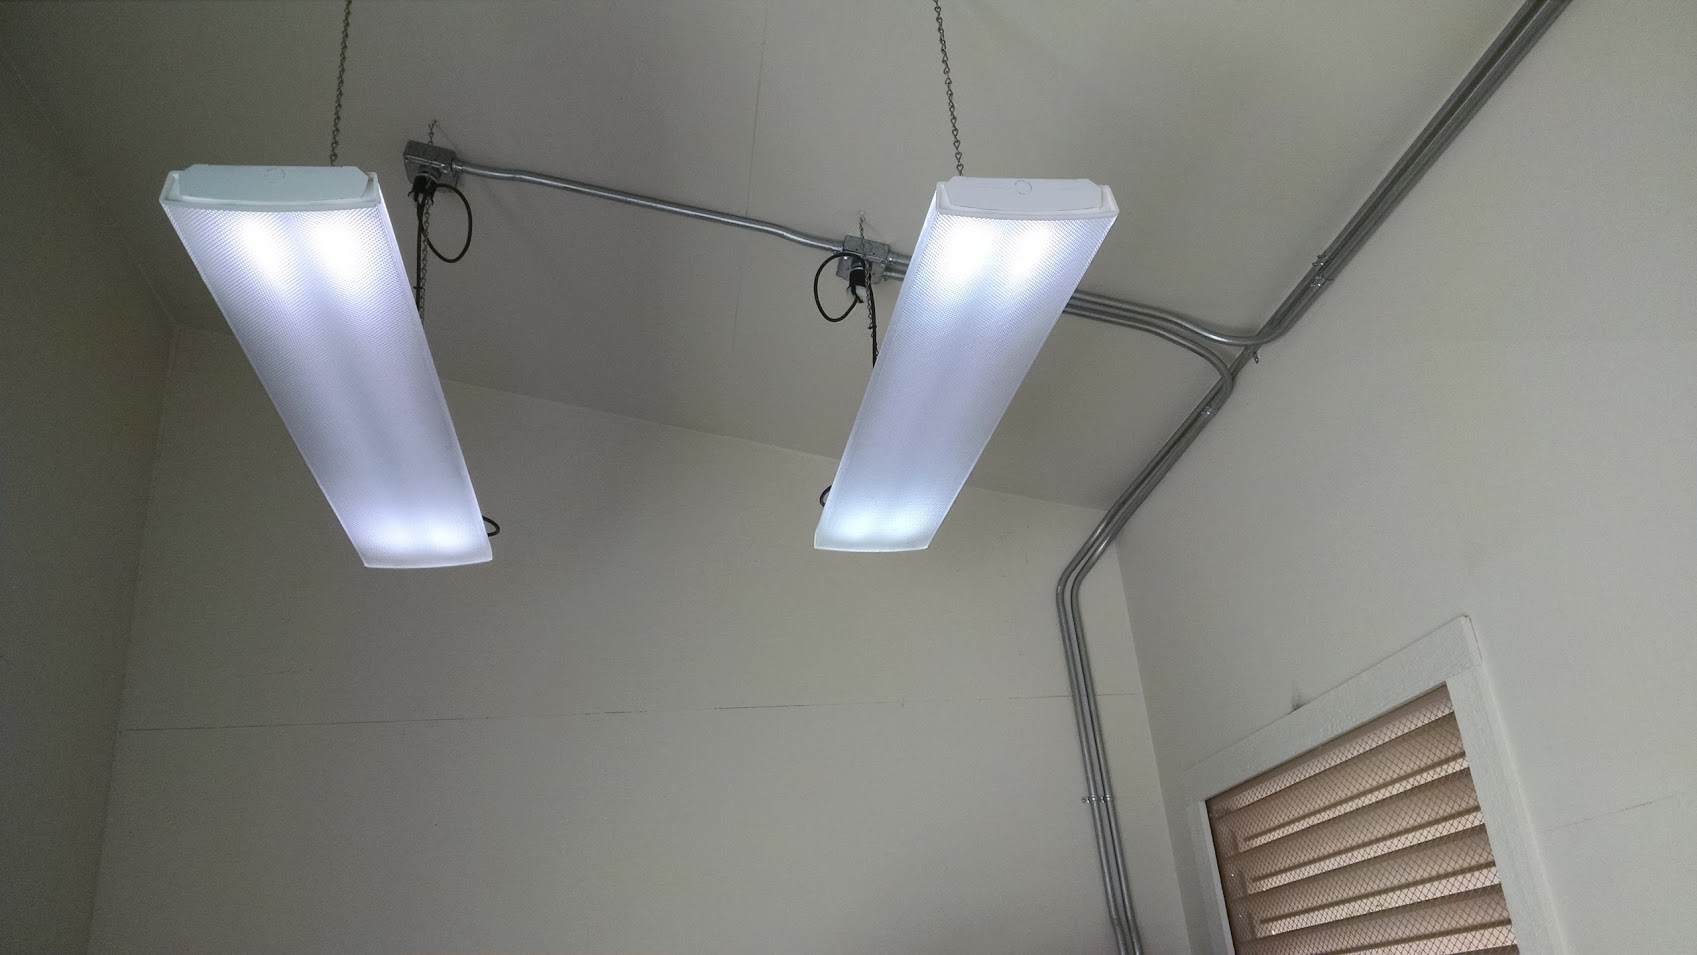 Florescent Lights and Electrical Piping